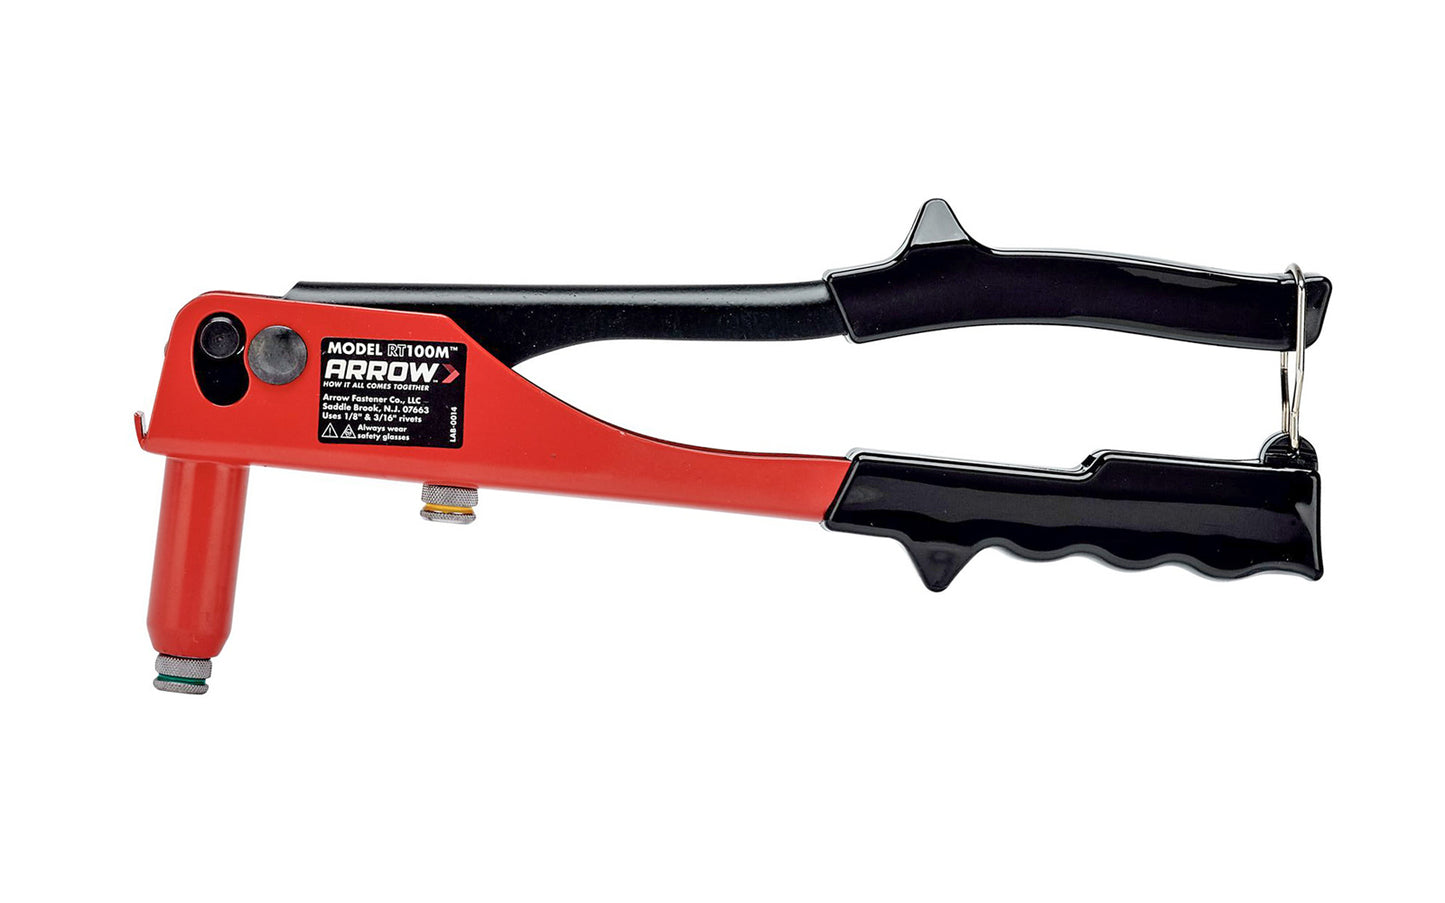 This Arrow RT100M Rivet Tool is a basic rivet tool suitable for most home riveting jobs. Ideal for automotive, gutters, HVAC, sheet metal, storm doors. Works with steel or aluminum rivets in sizes 1/8" & 3/16". Spring loaded tool. Arrow Fastener Model No. RT100M. 079055181002. Lightweight design with a comfortable grip